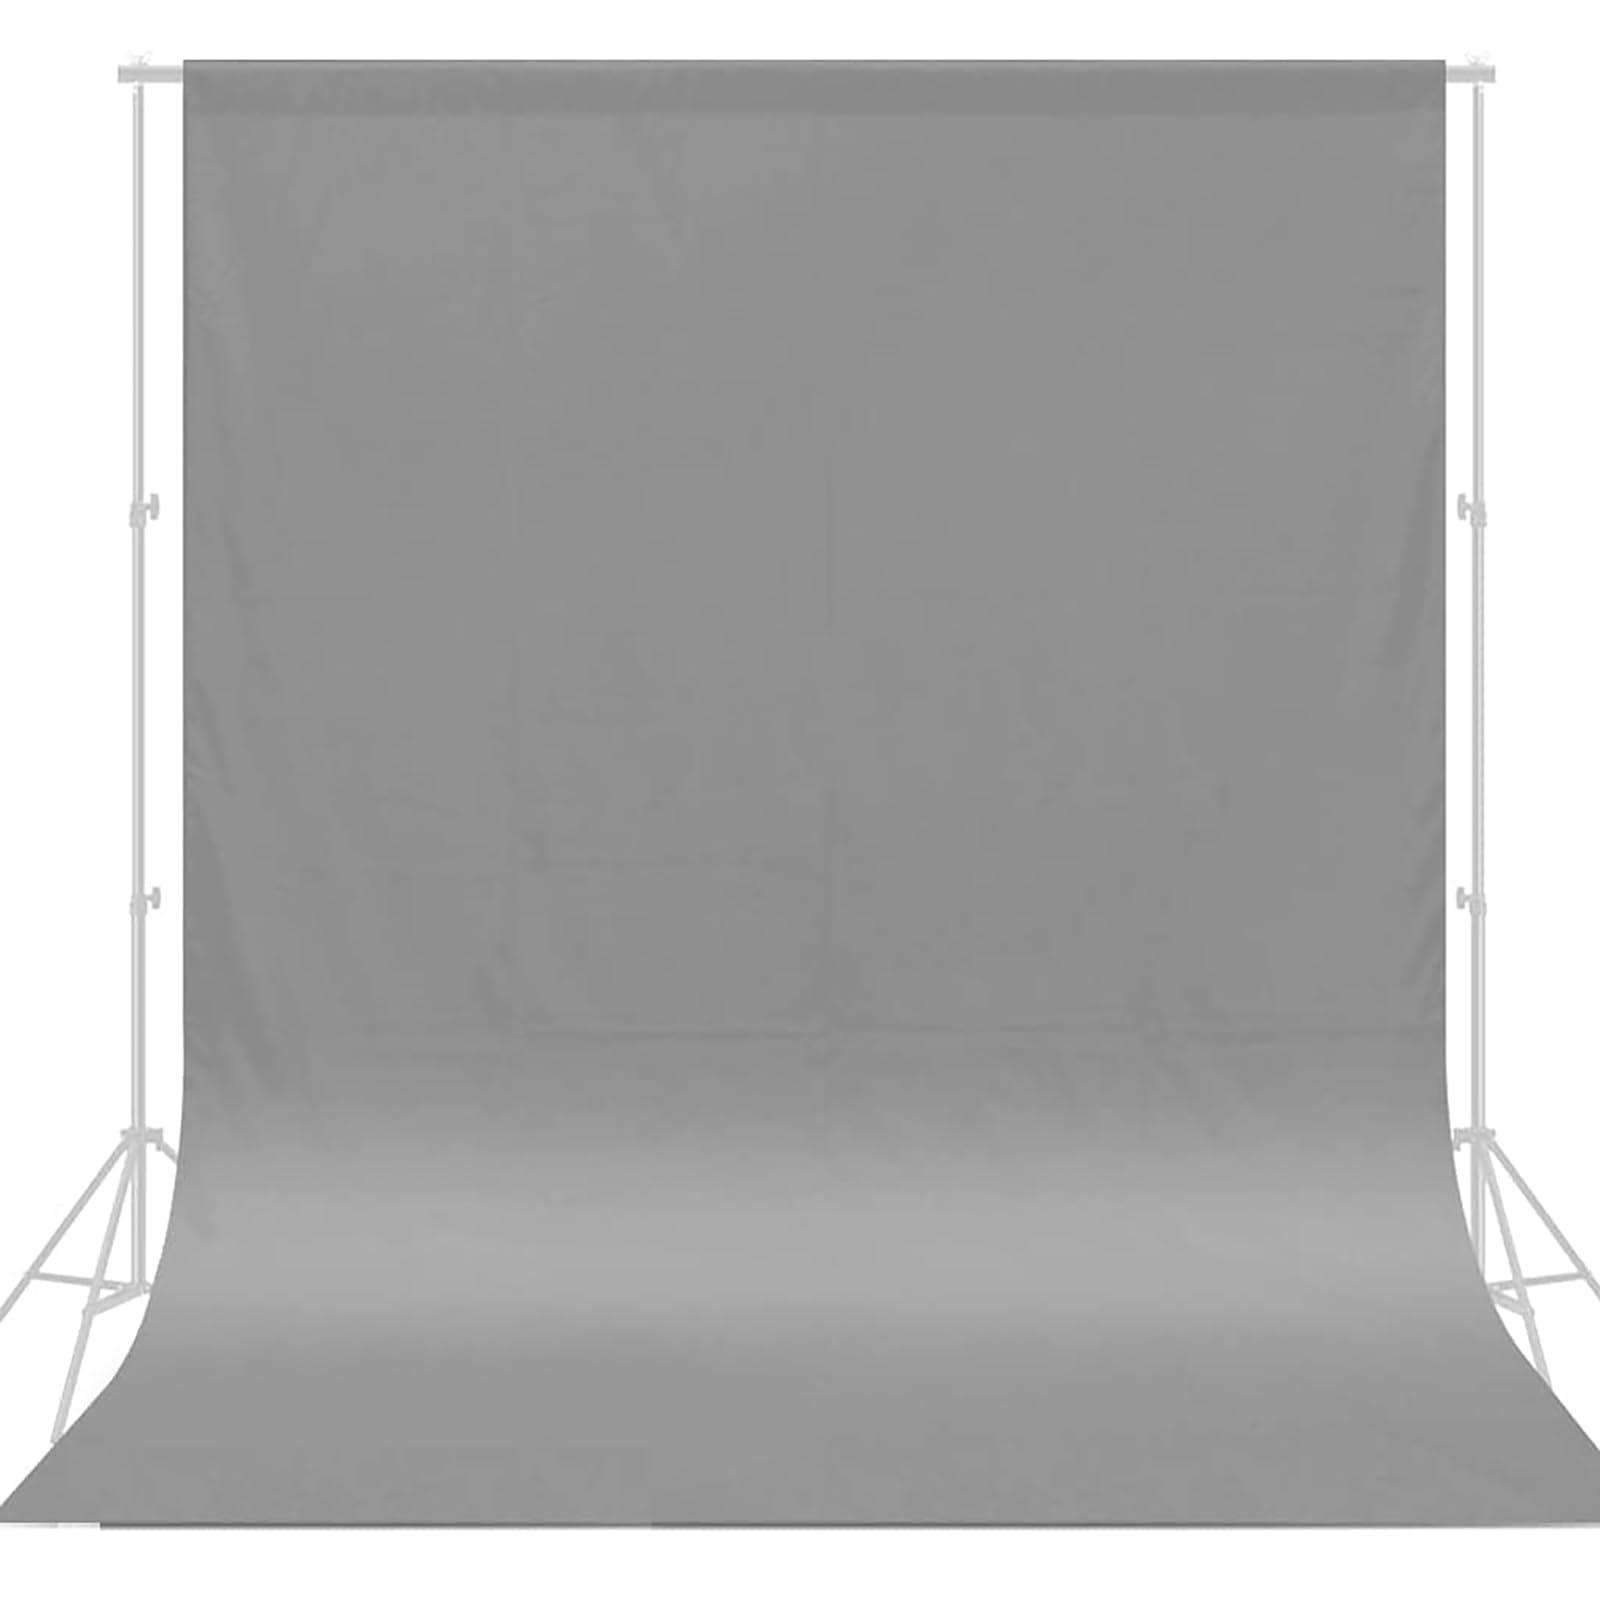 CPLIRIS 10x12ft Grey Backdrop for Photography, Pure Polyester Grey Photo Booth Backdrop Collapsible Grey Screen Curtain for Photoshoot, Party and Video